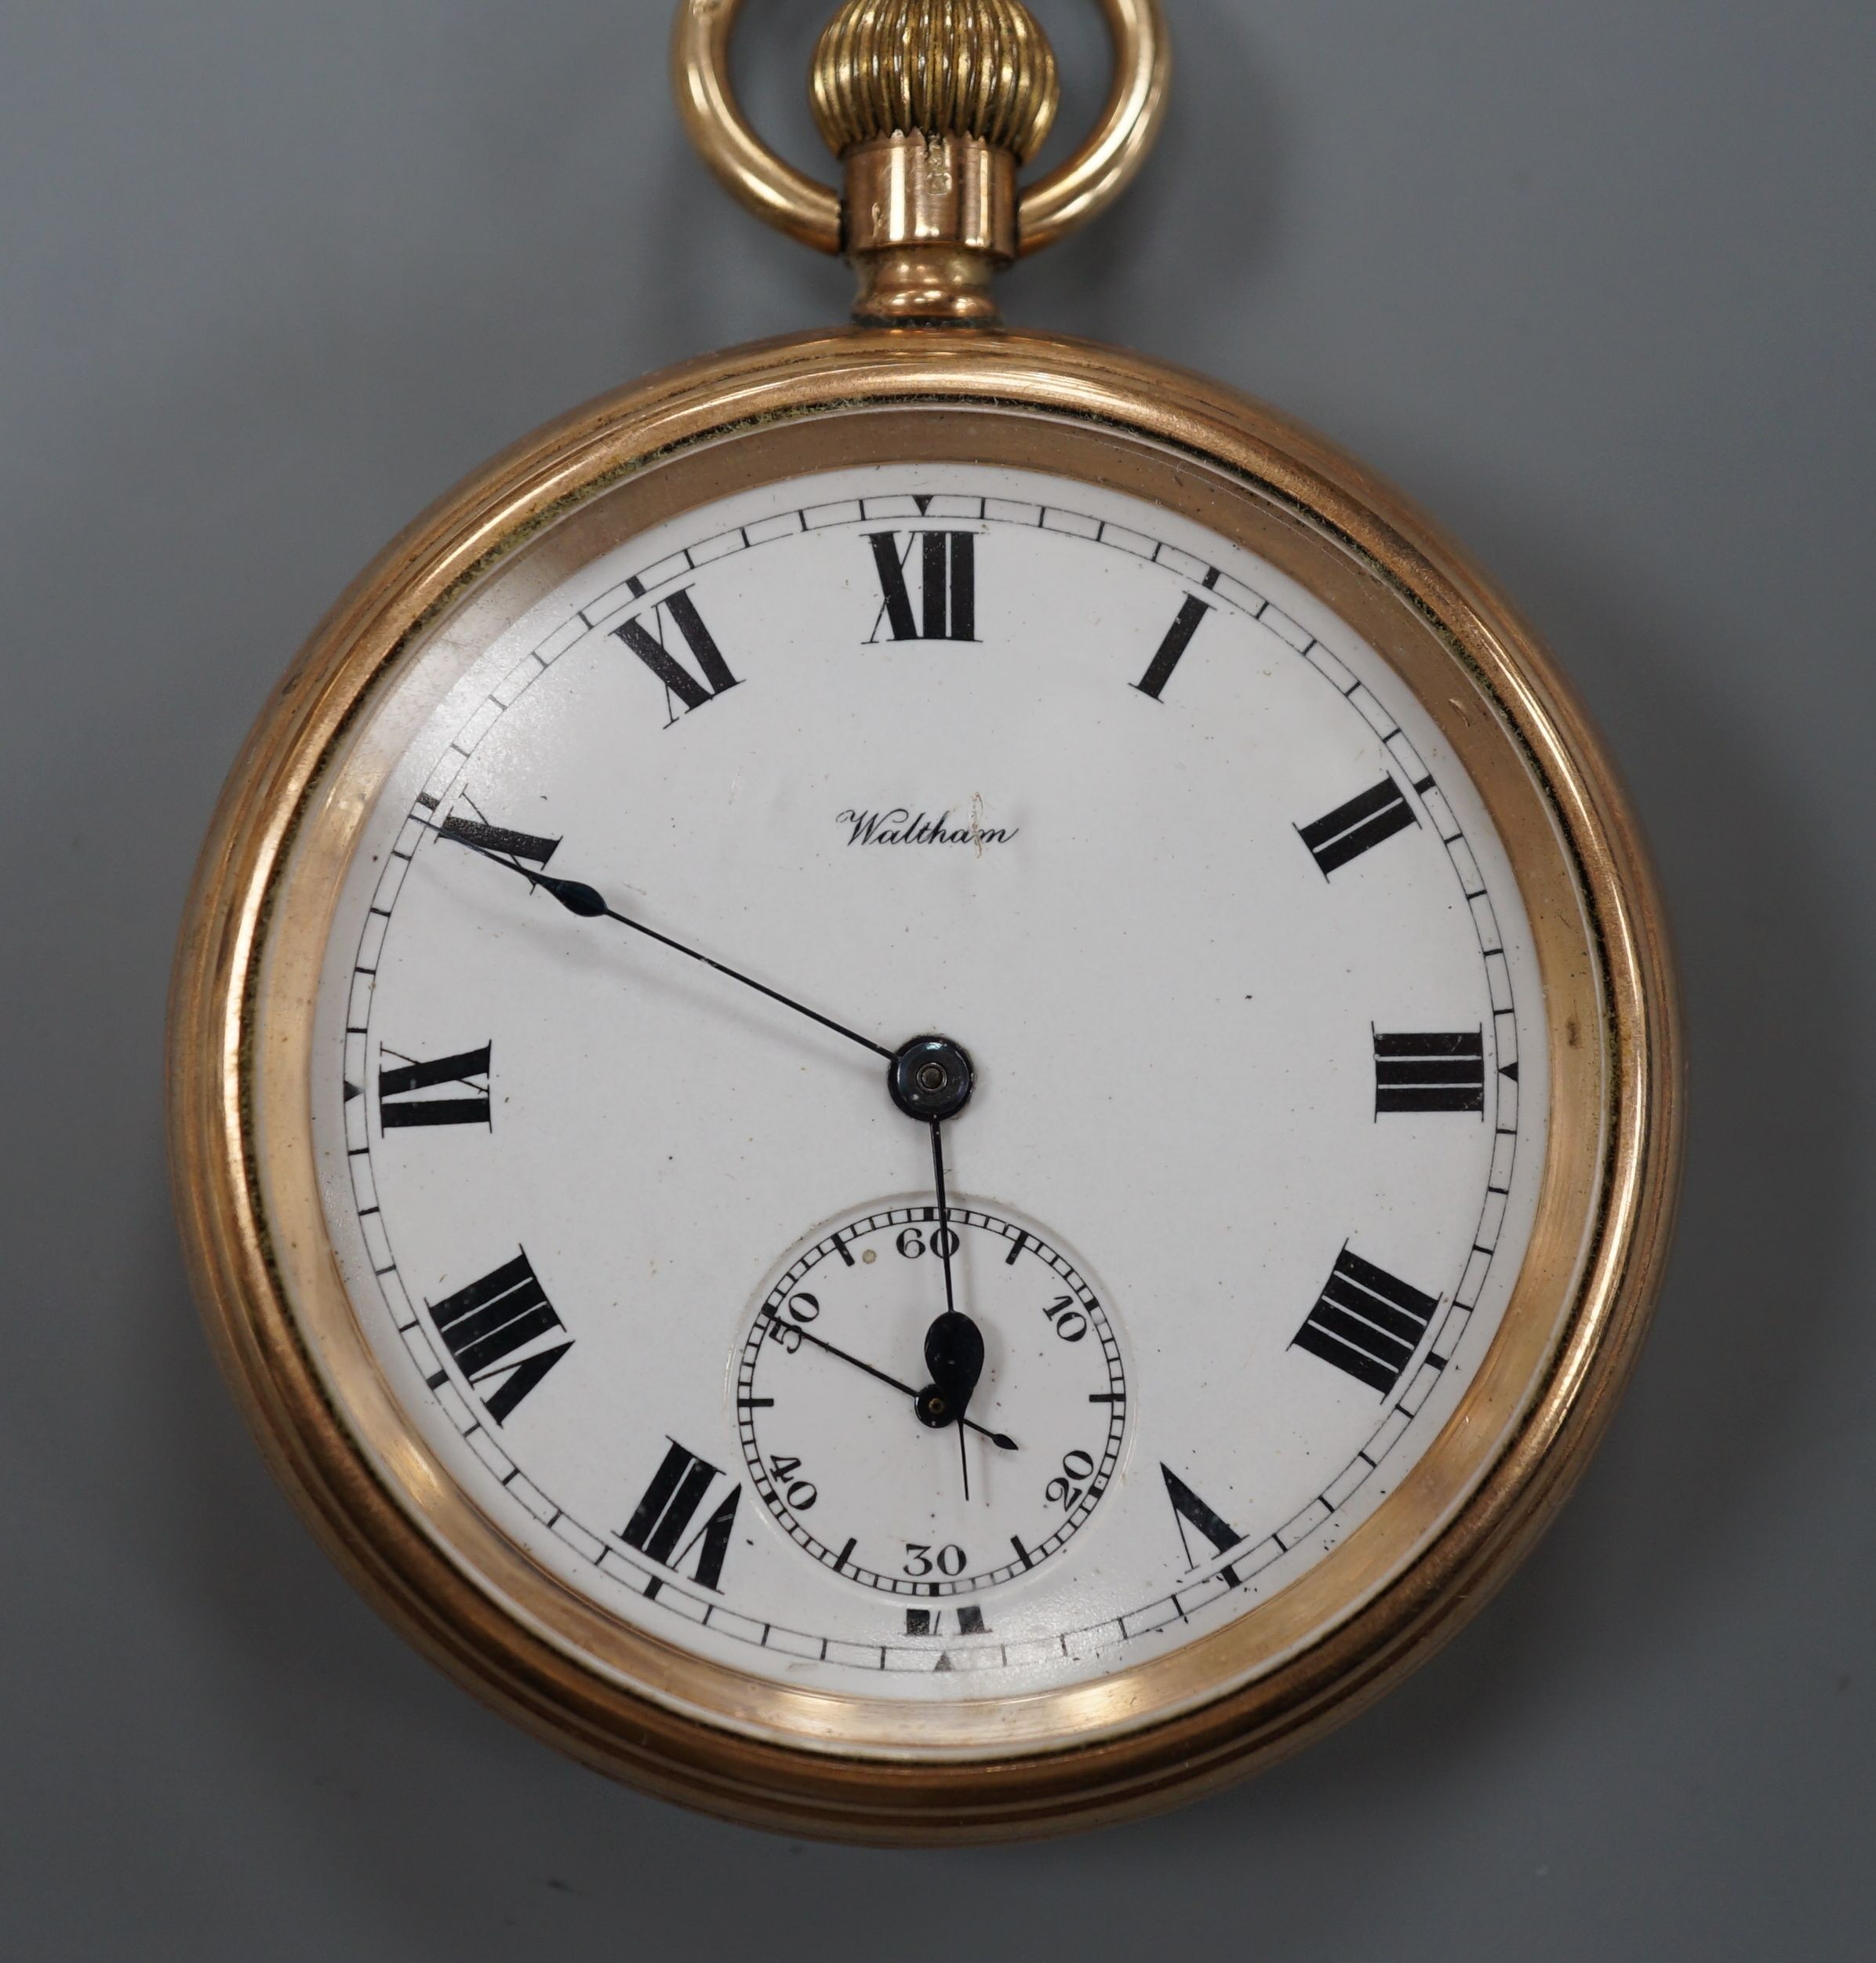 A 9ct gold Waltham keyless pocket watch, with enamelled Roman dial and subsidary seconds, movement